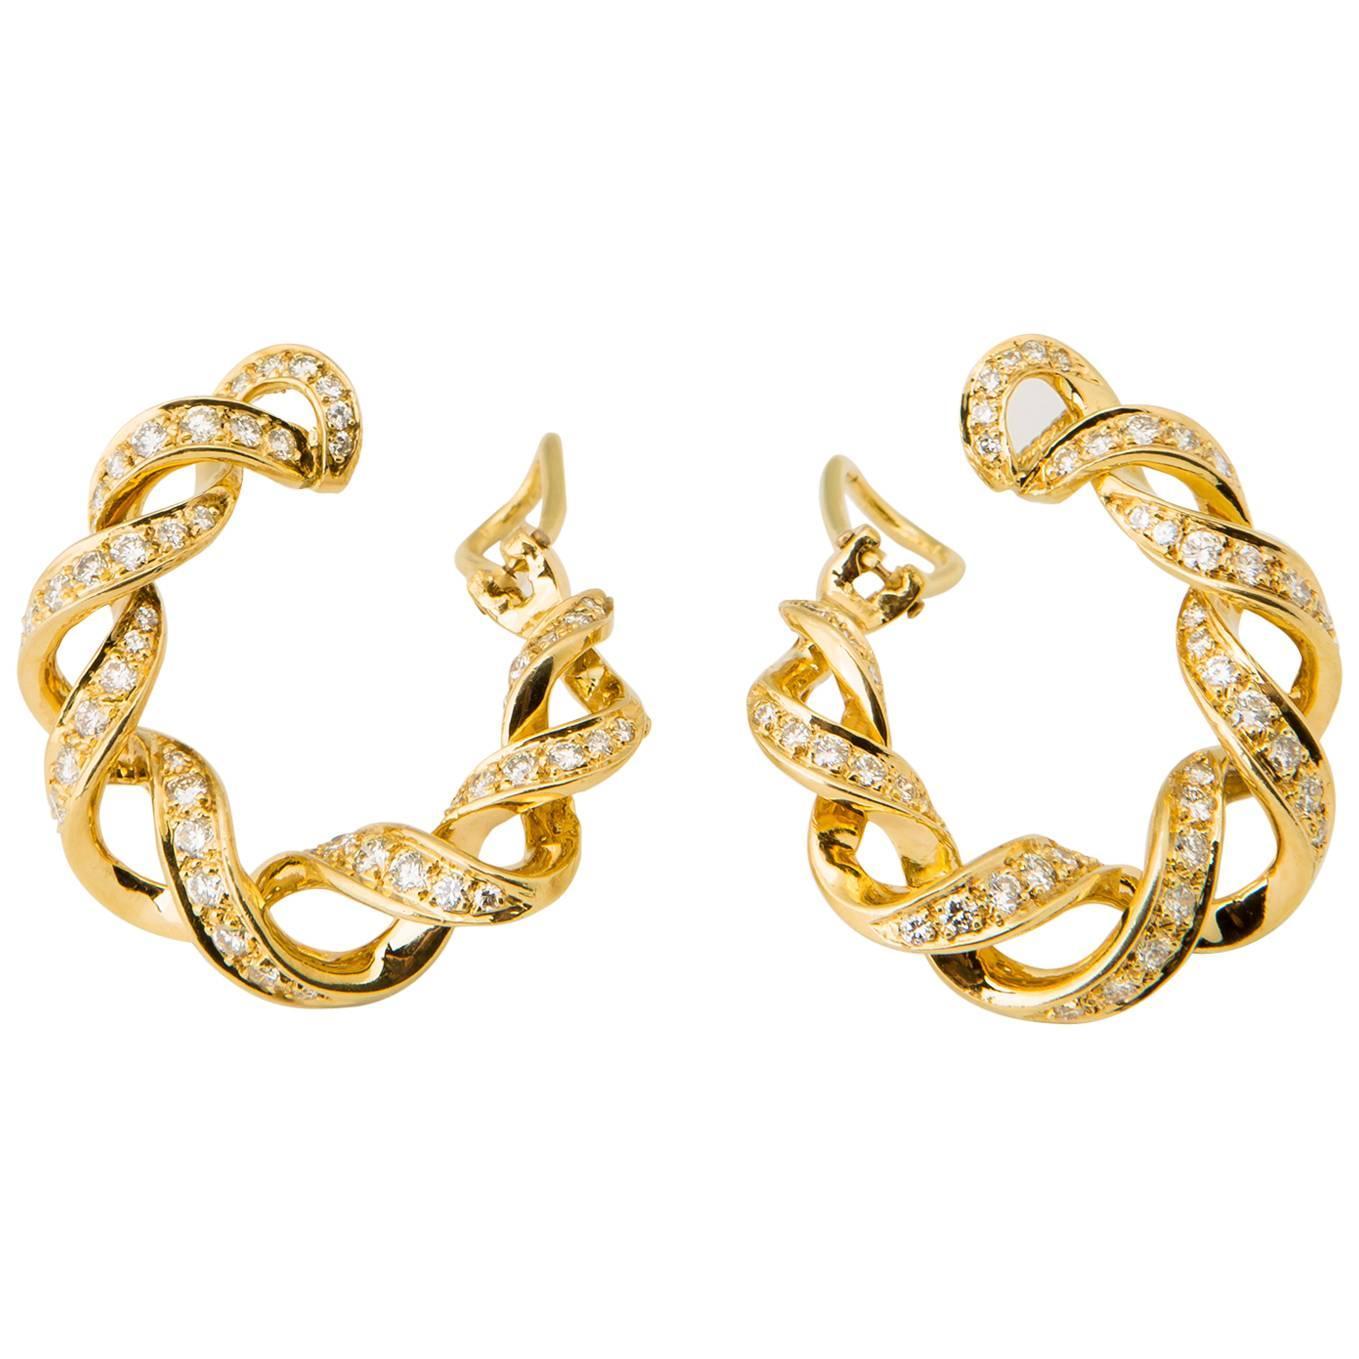 Tiffany and Co. Diamond Gold Hoop Earrings For Sale at 1stdibs